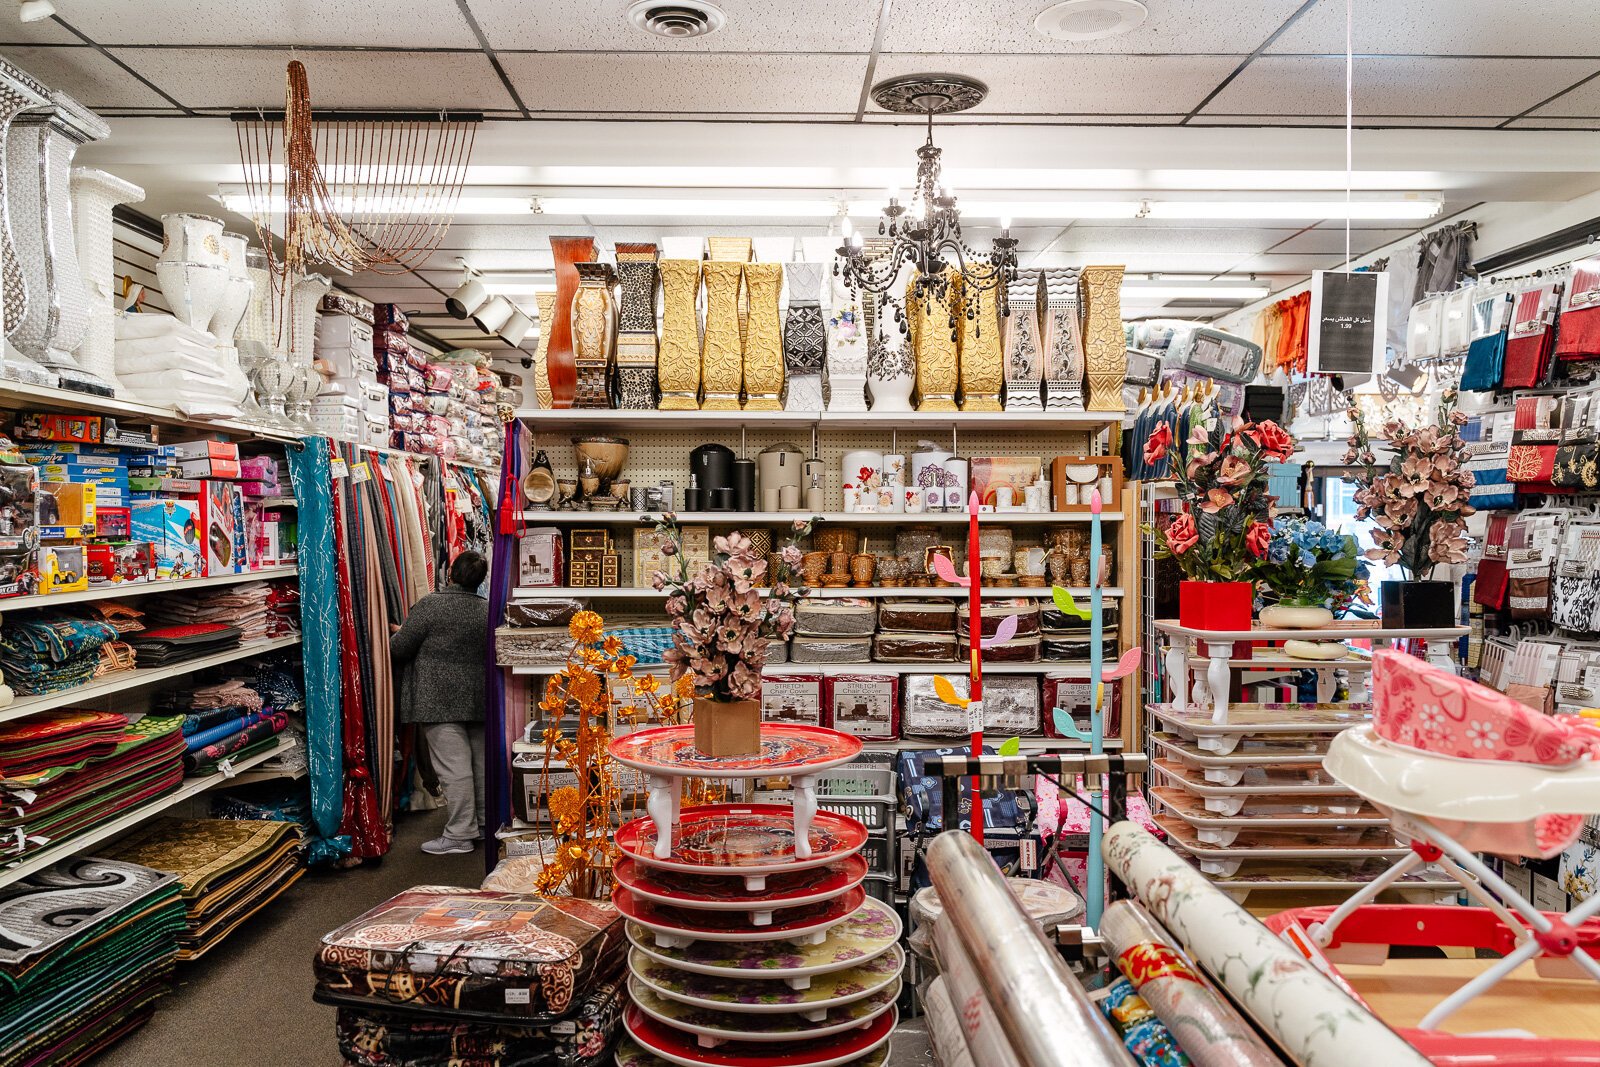 Nice Price carries household goods geared towards Southwest Detroit's immigrant communities.